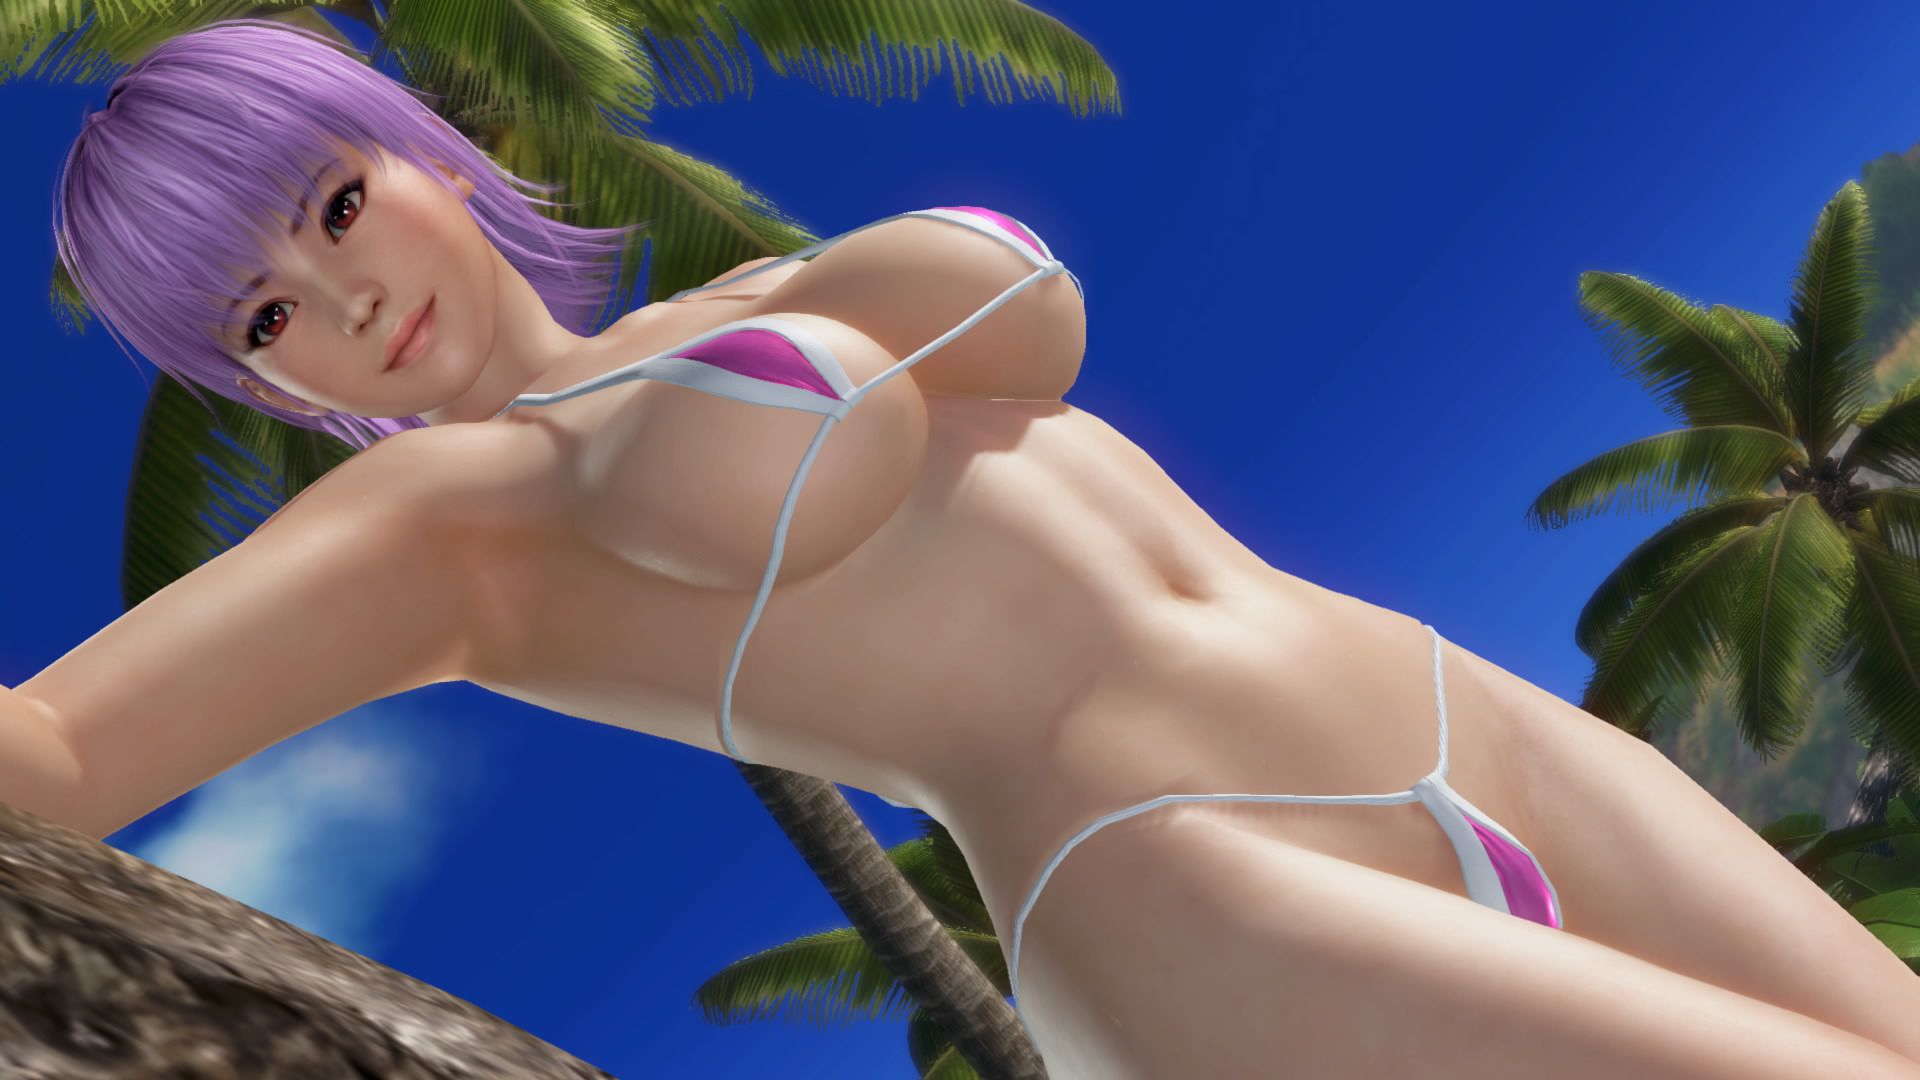 Doax3 "The color which suits the Aya-chan is pink" theory is verified 29